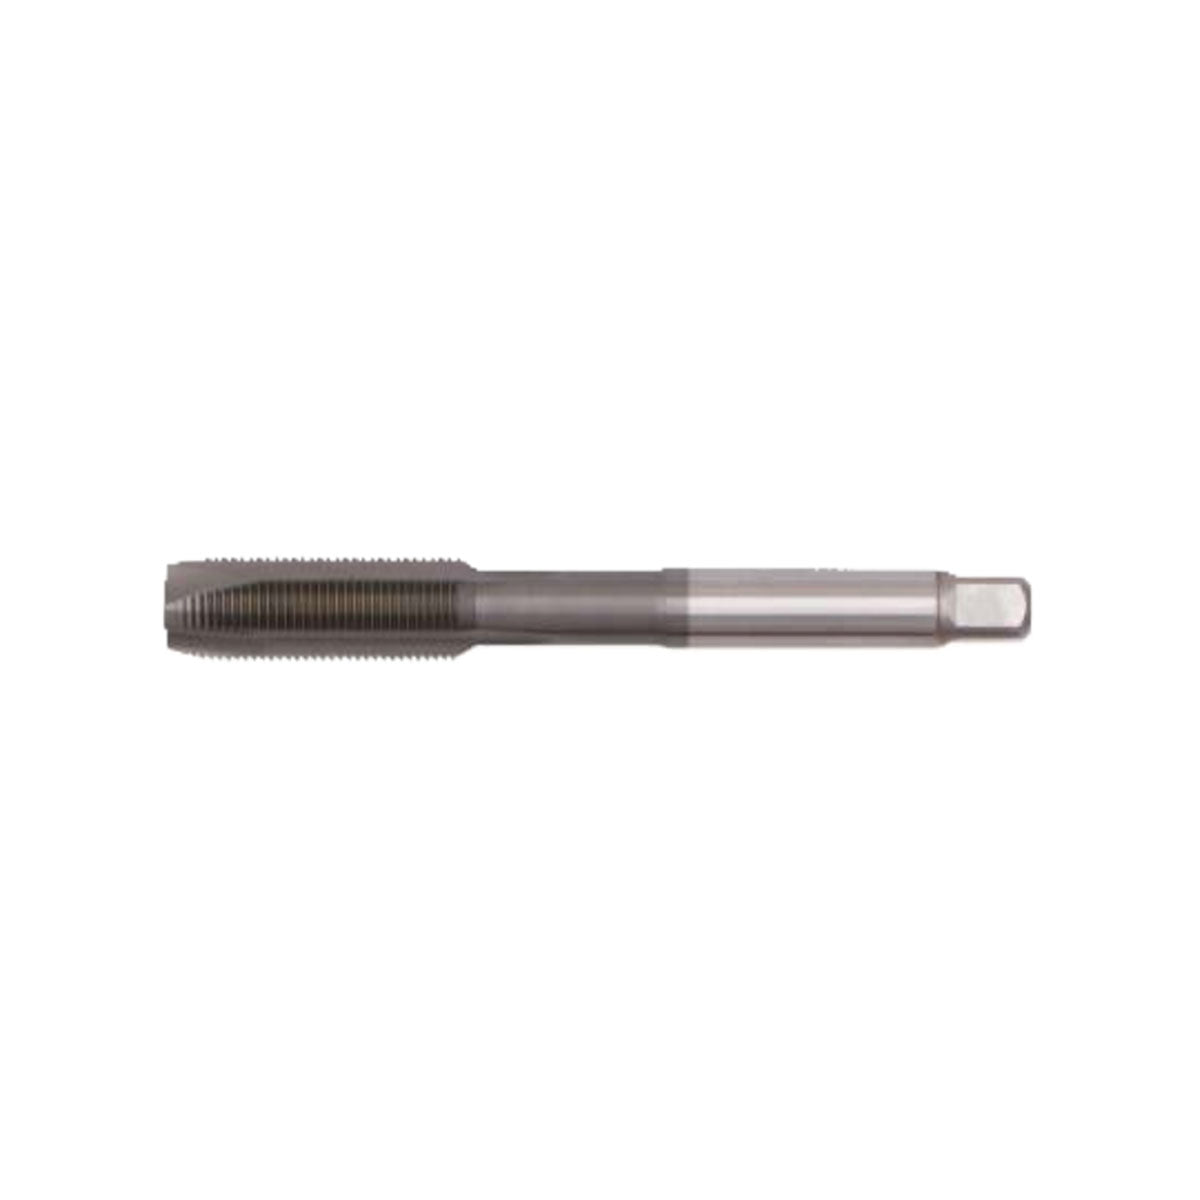 S-POT (M3~NO.8×0.35~36UNF) MP030035 Spiral pointed taps with taps fine thread - Makotools Industrial Supply Tools for Metal Cutting